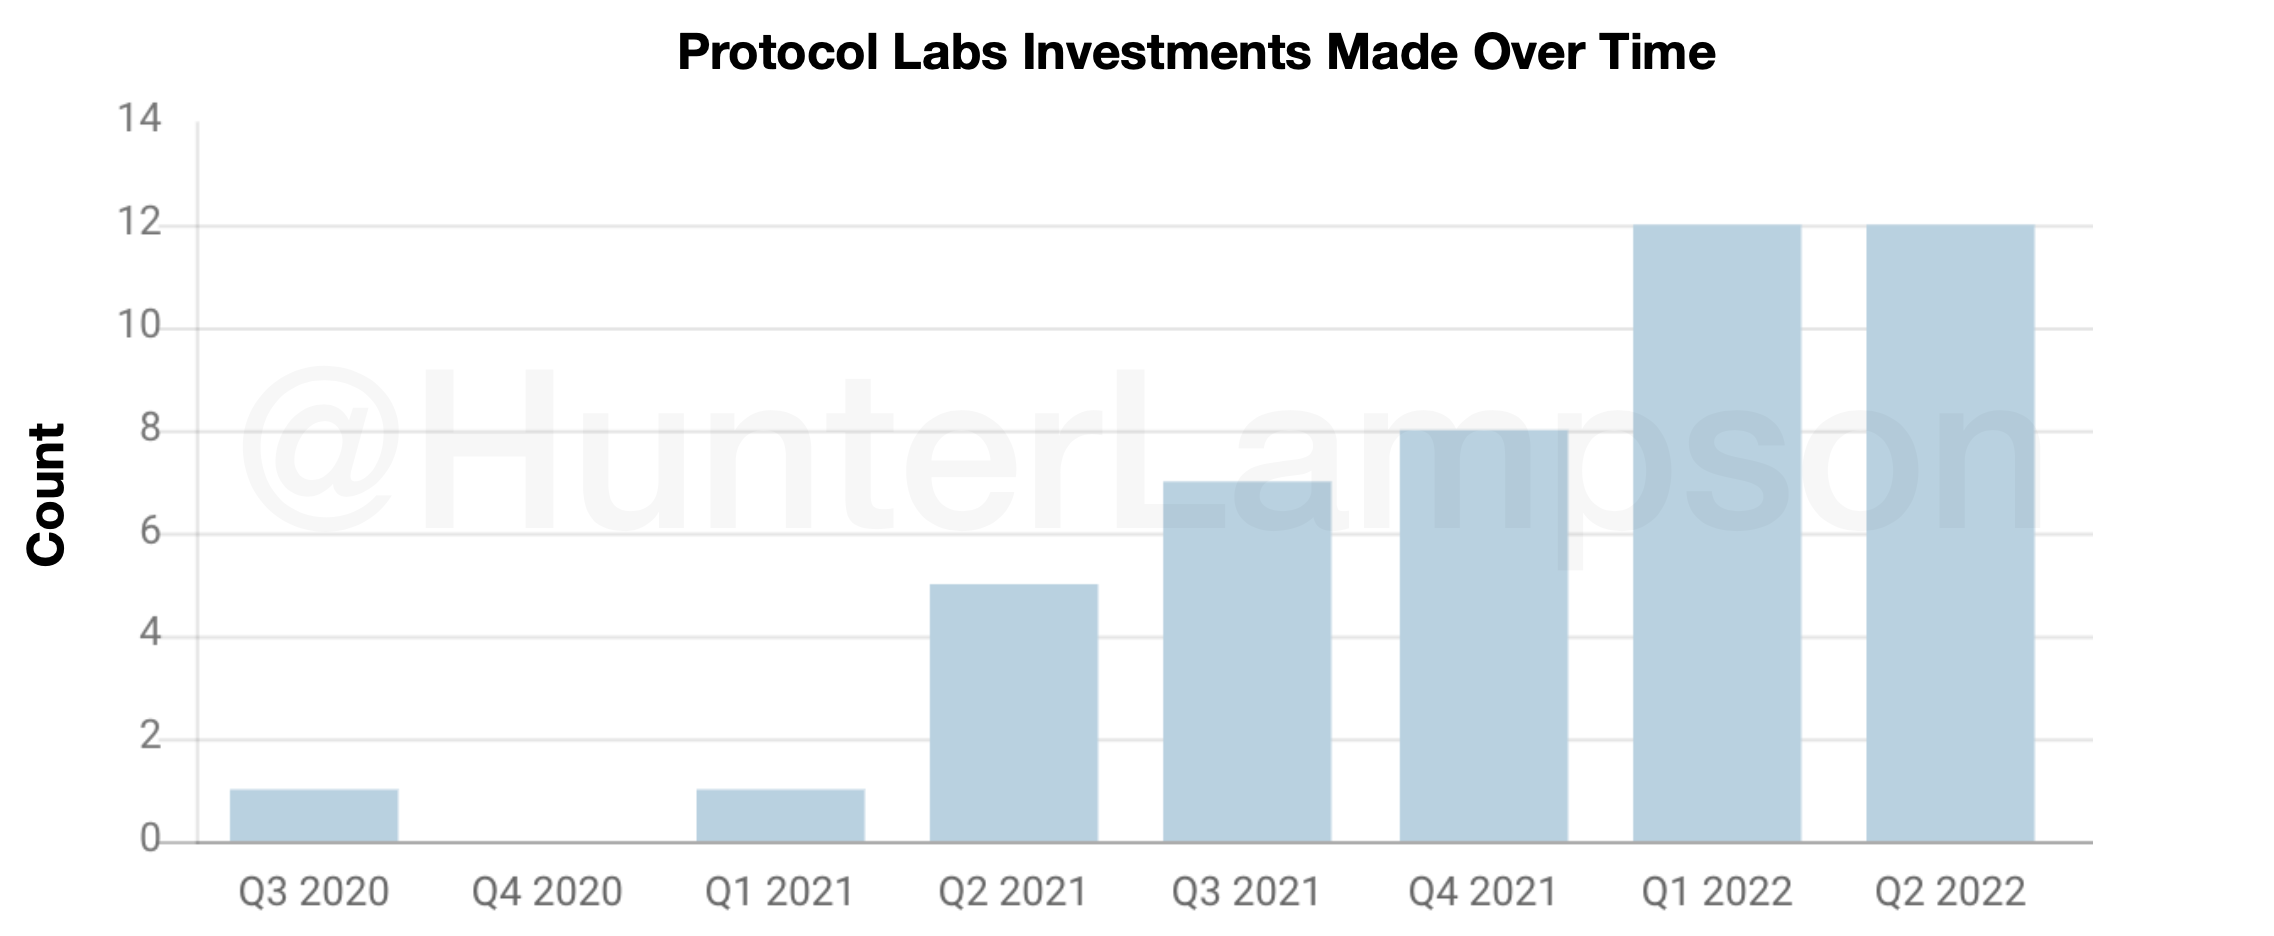 Figure 16. Protocol Labs investments over time. Source: Crunchbase.